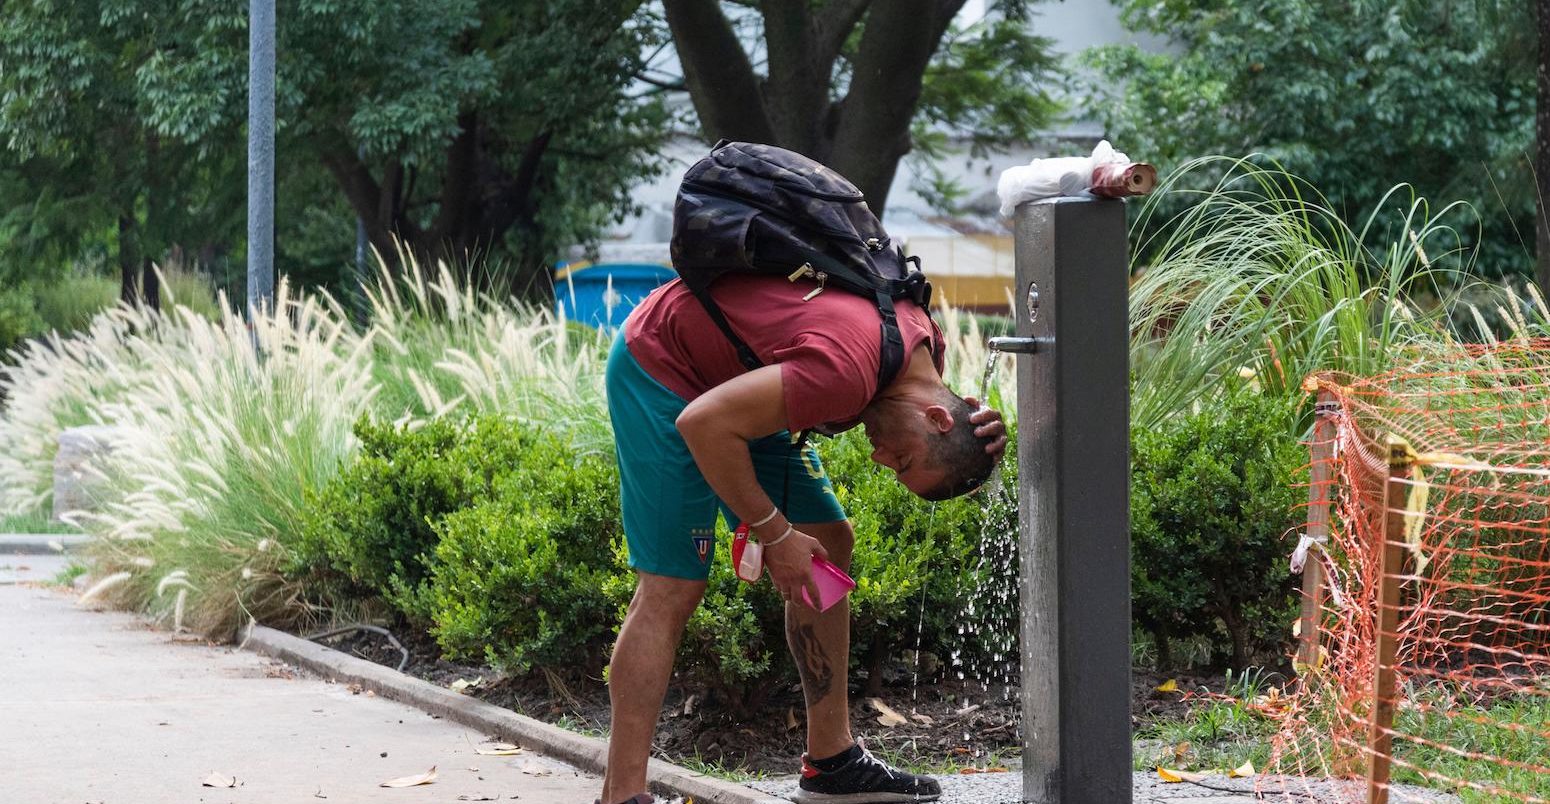 A young man refreshes himself at Giordano Bruno Square, City of Buenos Aires, during the January 2022 heat wave in Argentina.